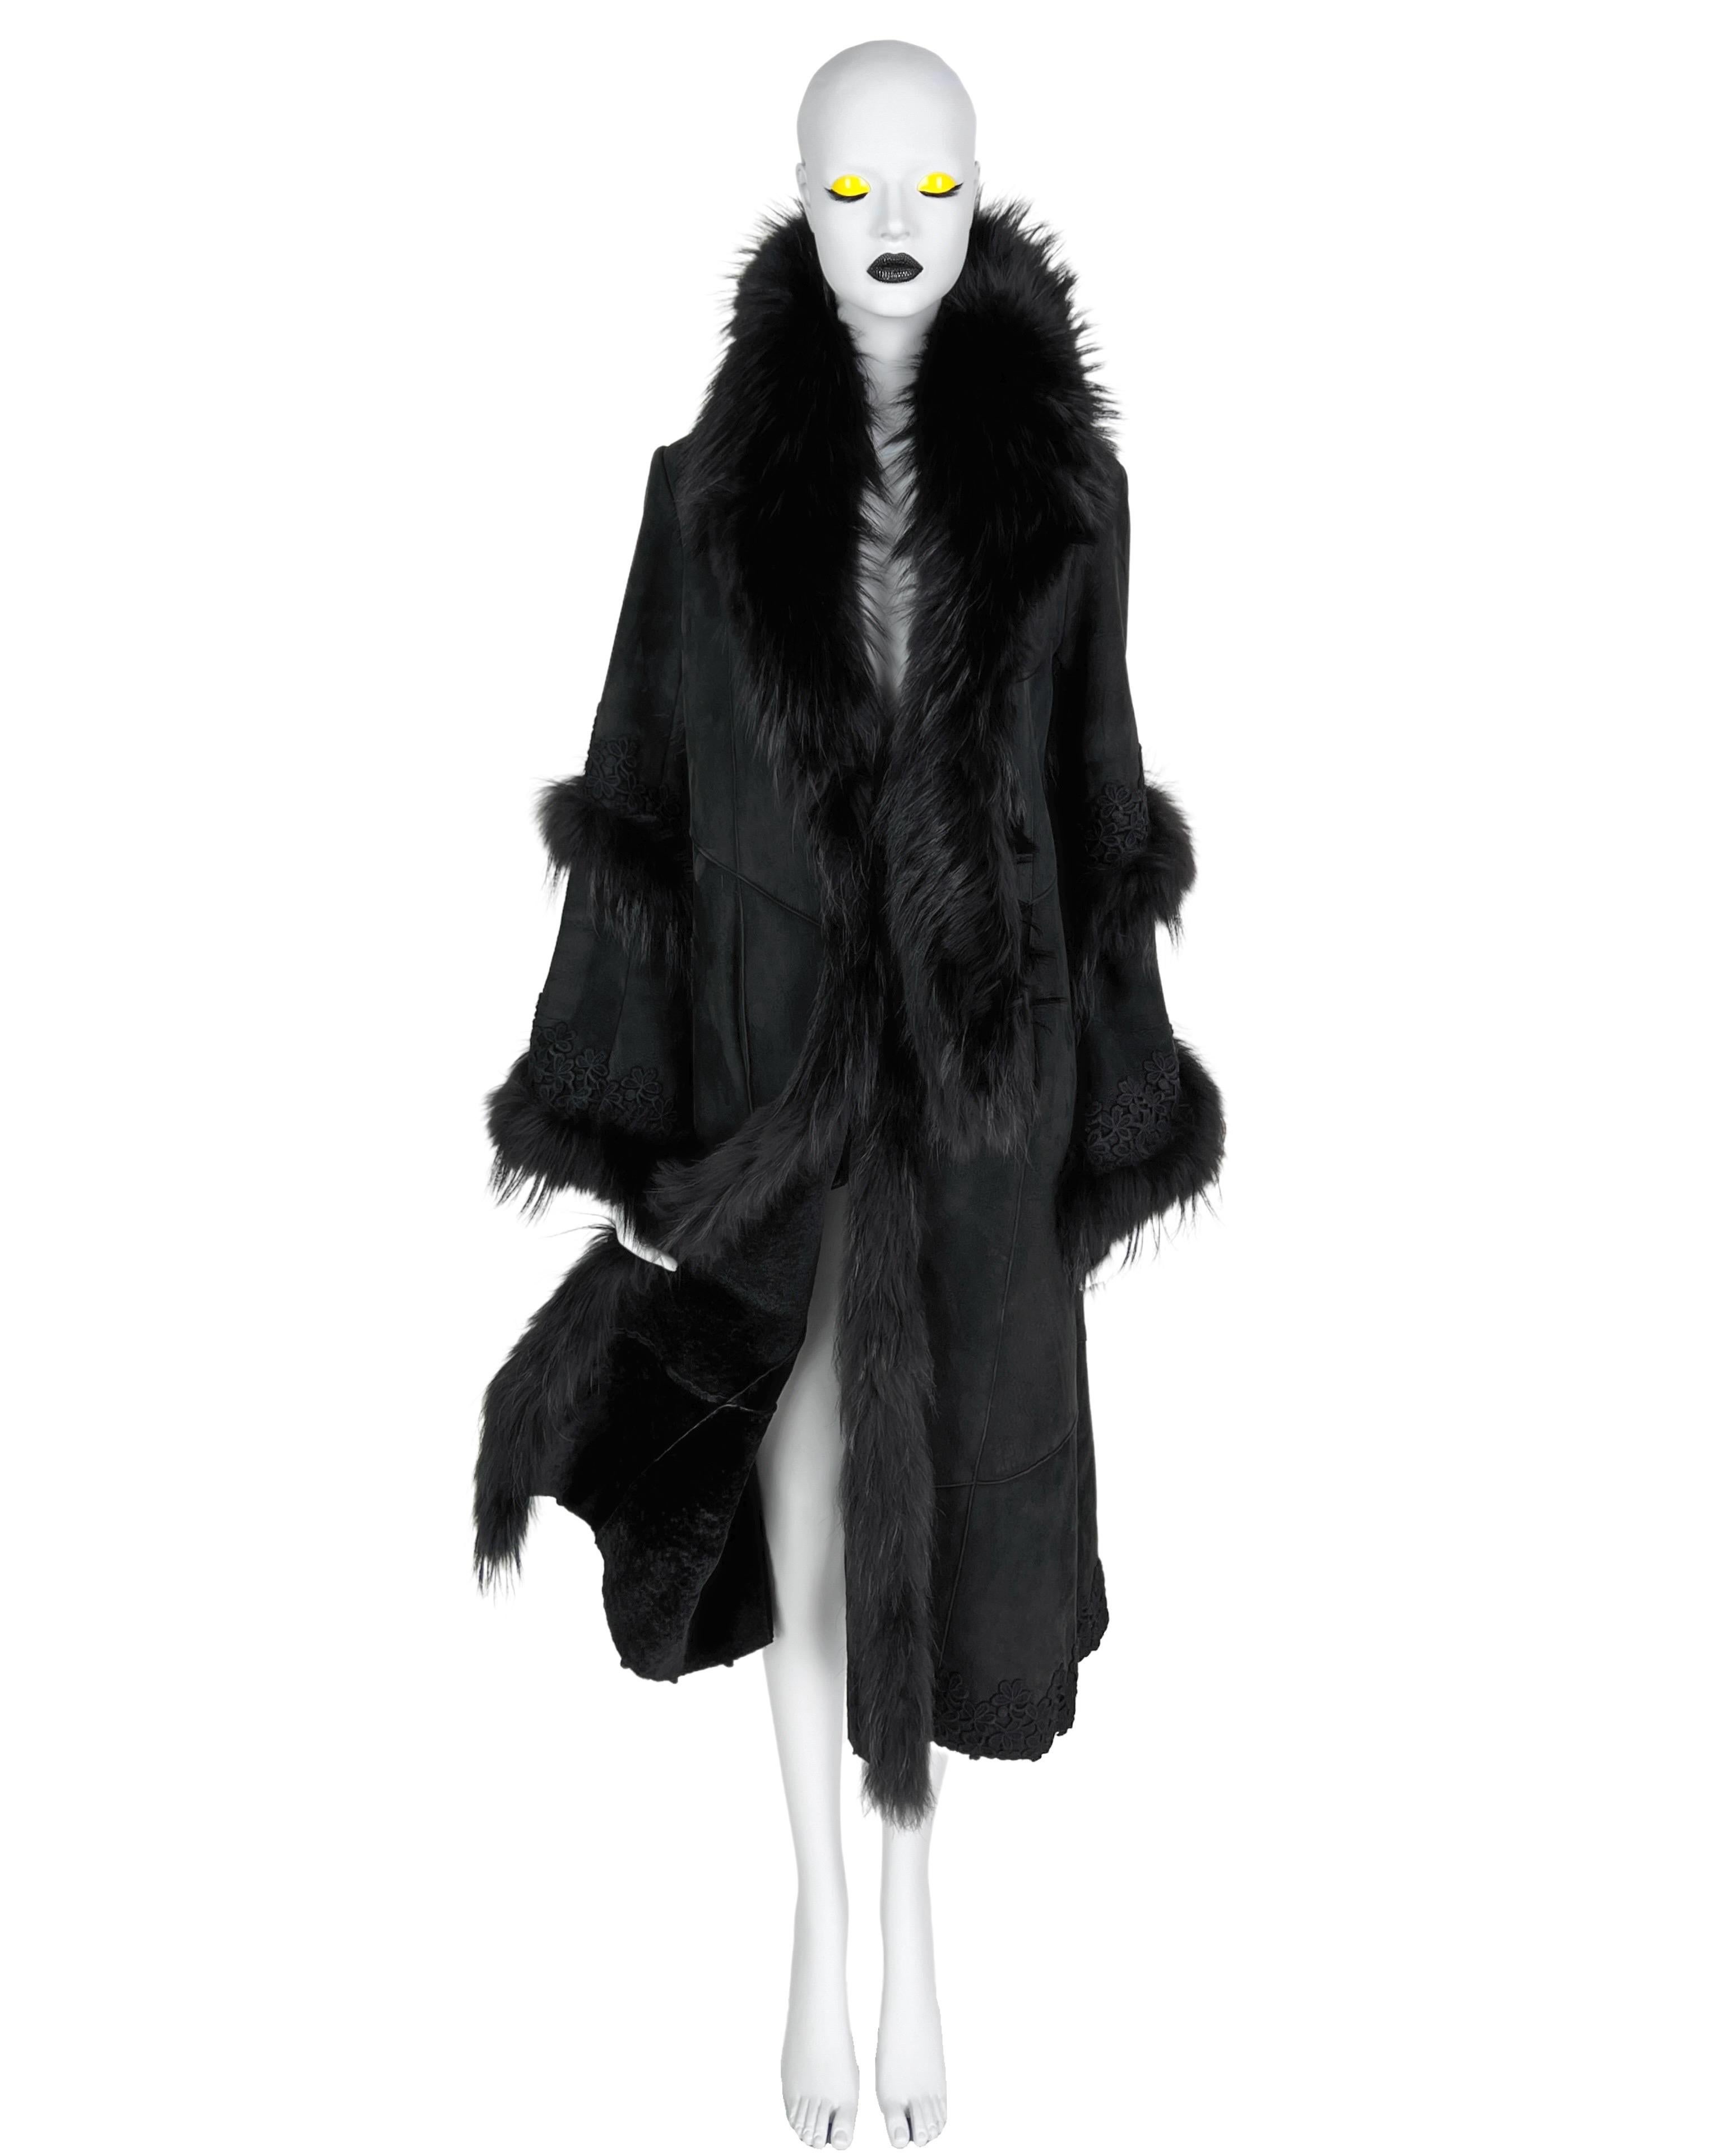 A stunning shearling coat from Roberto Cavalli Fall 1998 collection with a genuine fur trim and decorative applique lace details. Size S, fits true to size.

Excellent vintage condition.